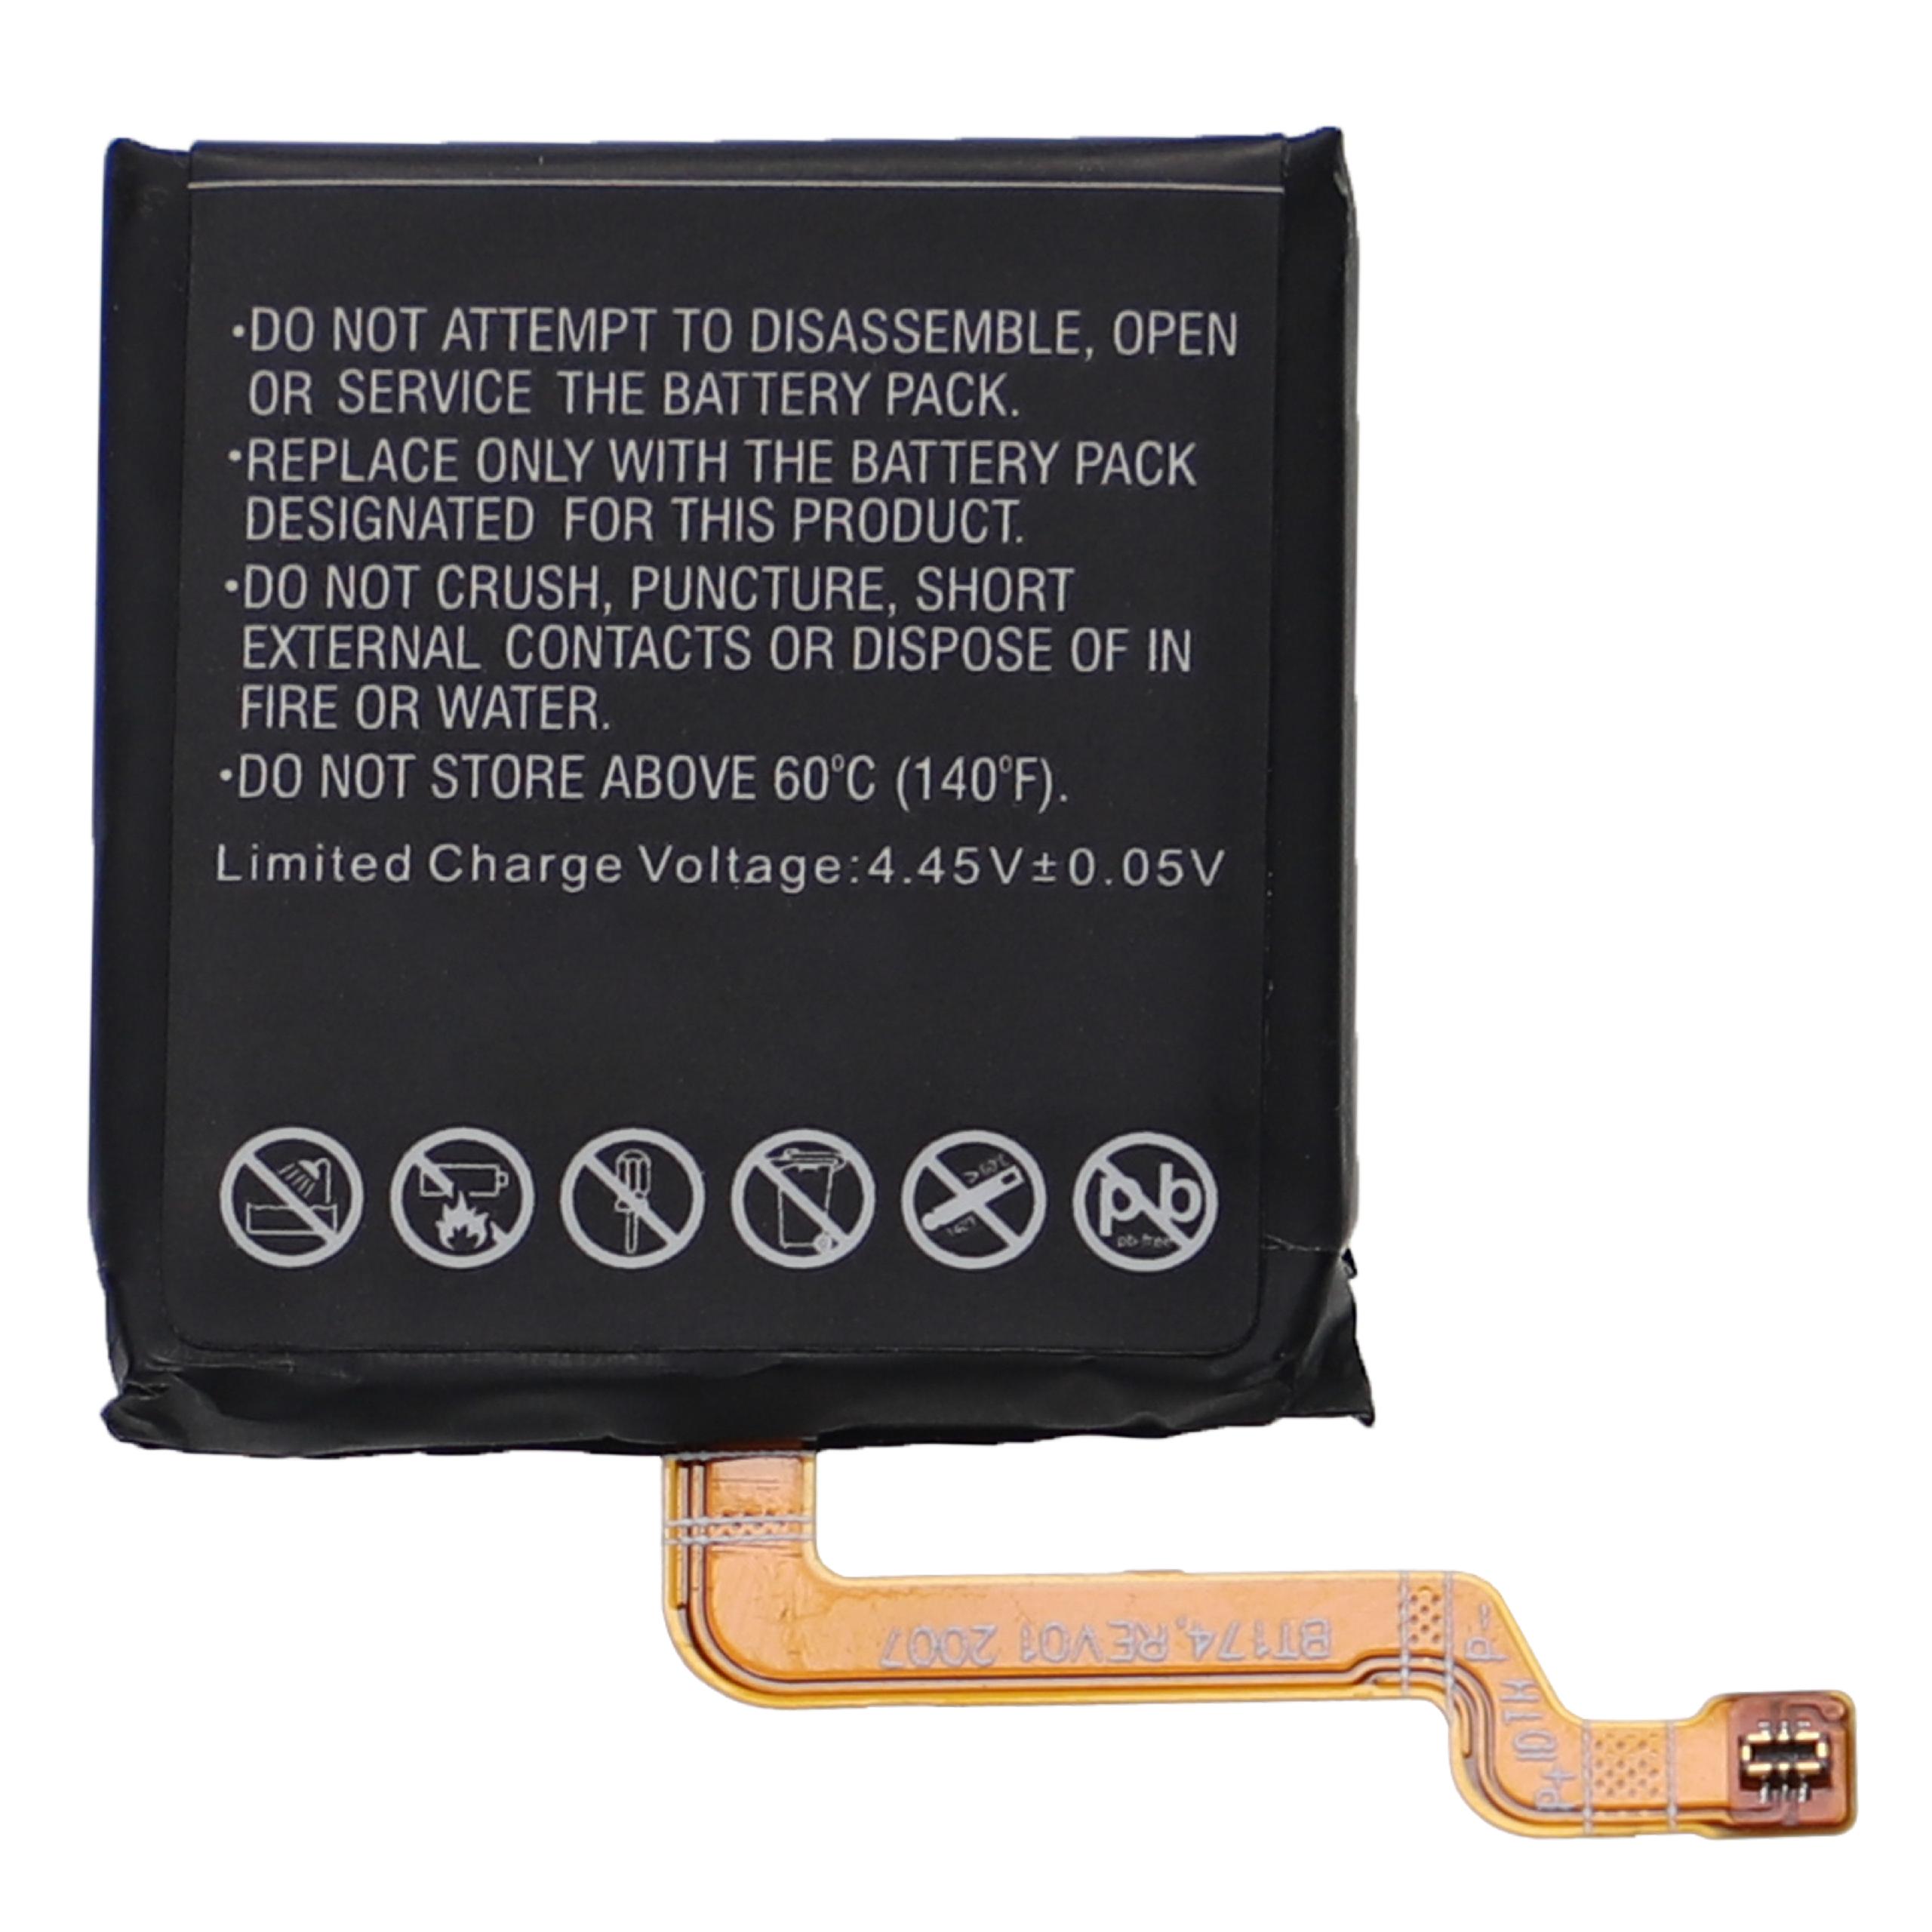 Smartwatch Battery Replacement for Huawei HB532729EFW-A, HB532729EFW - 450mAh 3.87V Li-polymer